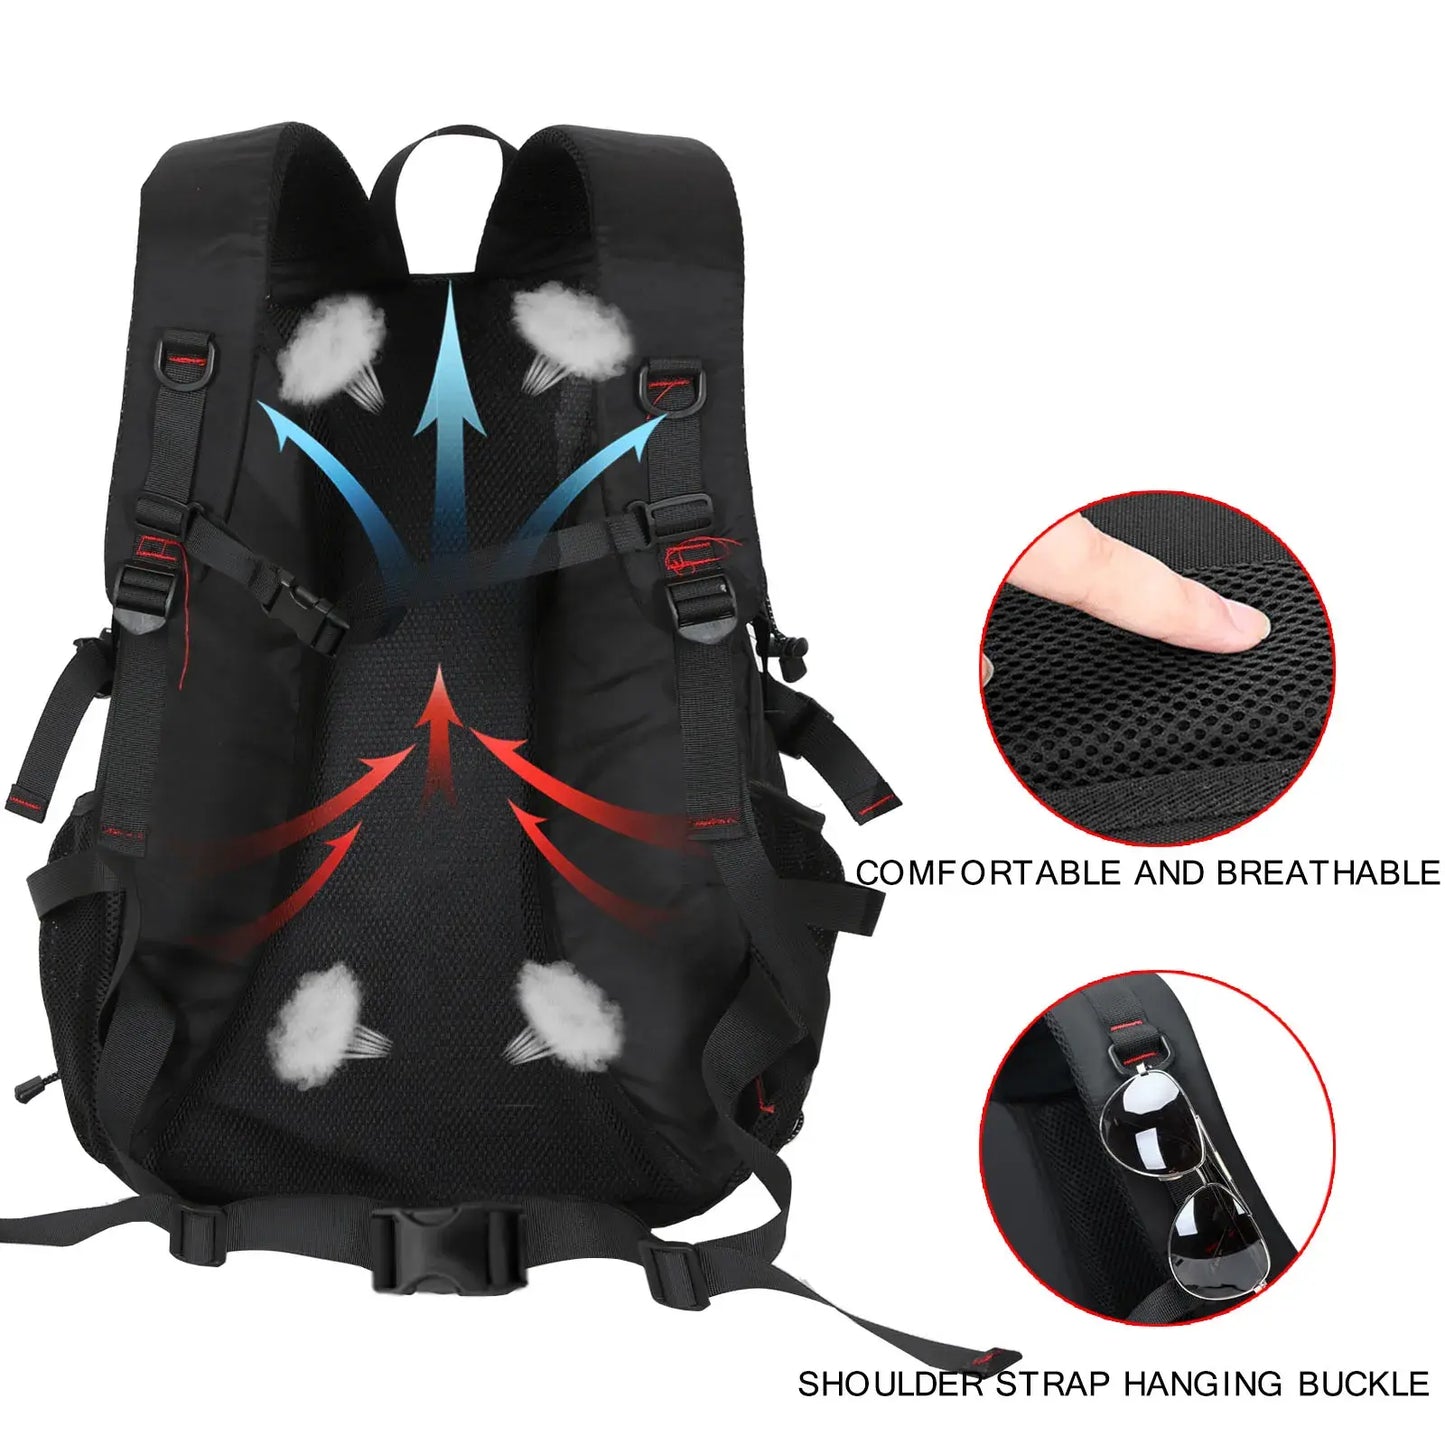 Waterproof Travel Backpack: Ideal for Outdoor Hiking - BlissfulBasic